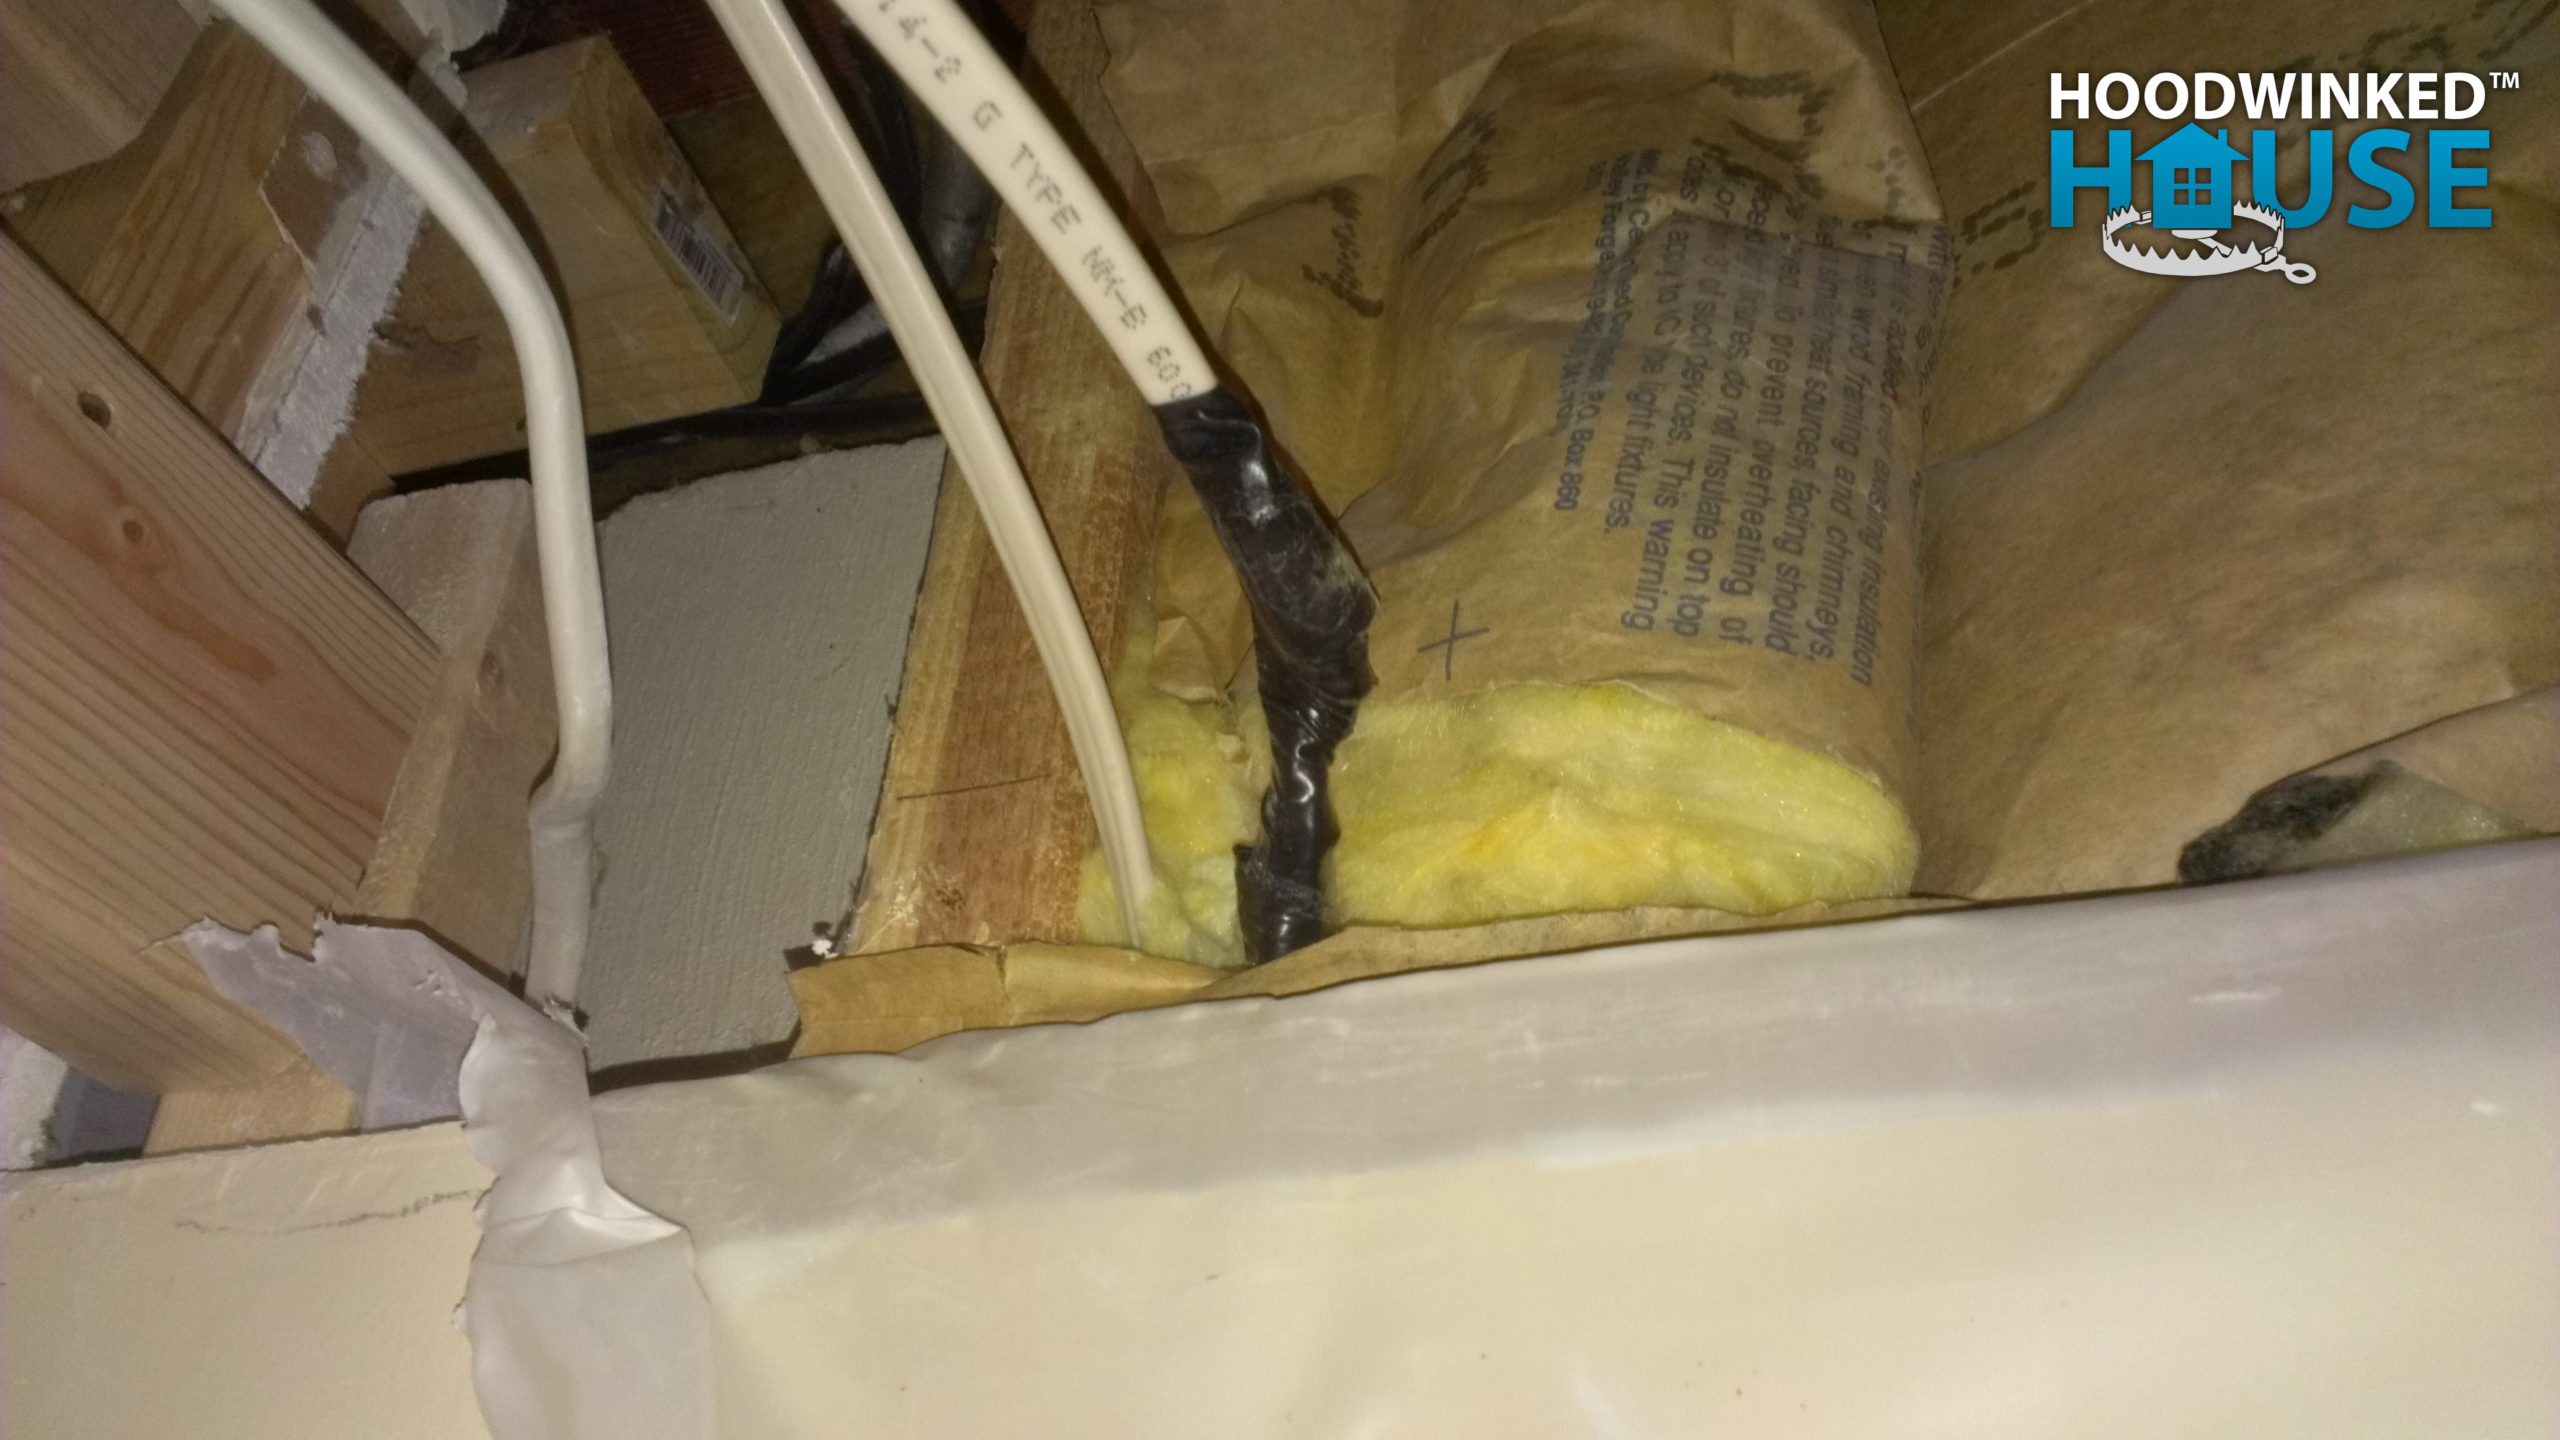 Spliced wires without a junction box discovered behind drywall.